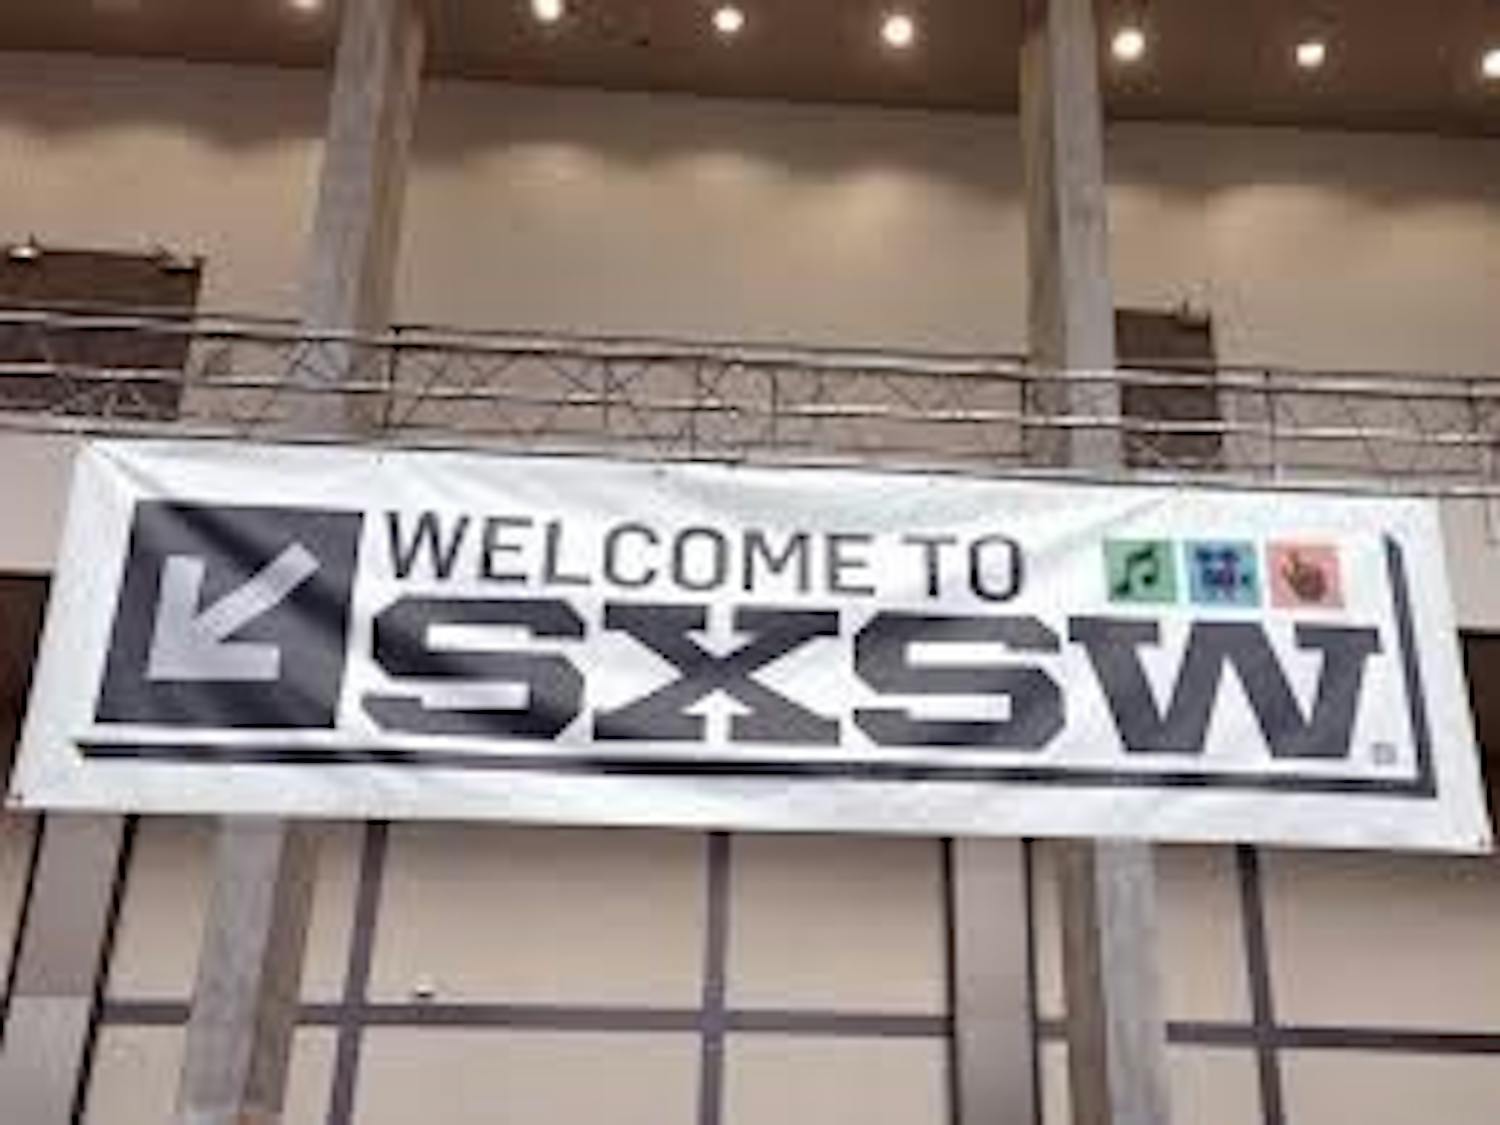 South by Southwest is one of the most influential yearly&nbsp;events in the arts and entertainment industry.&nbsp;